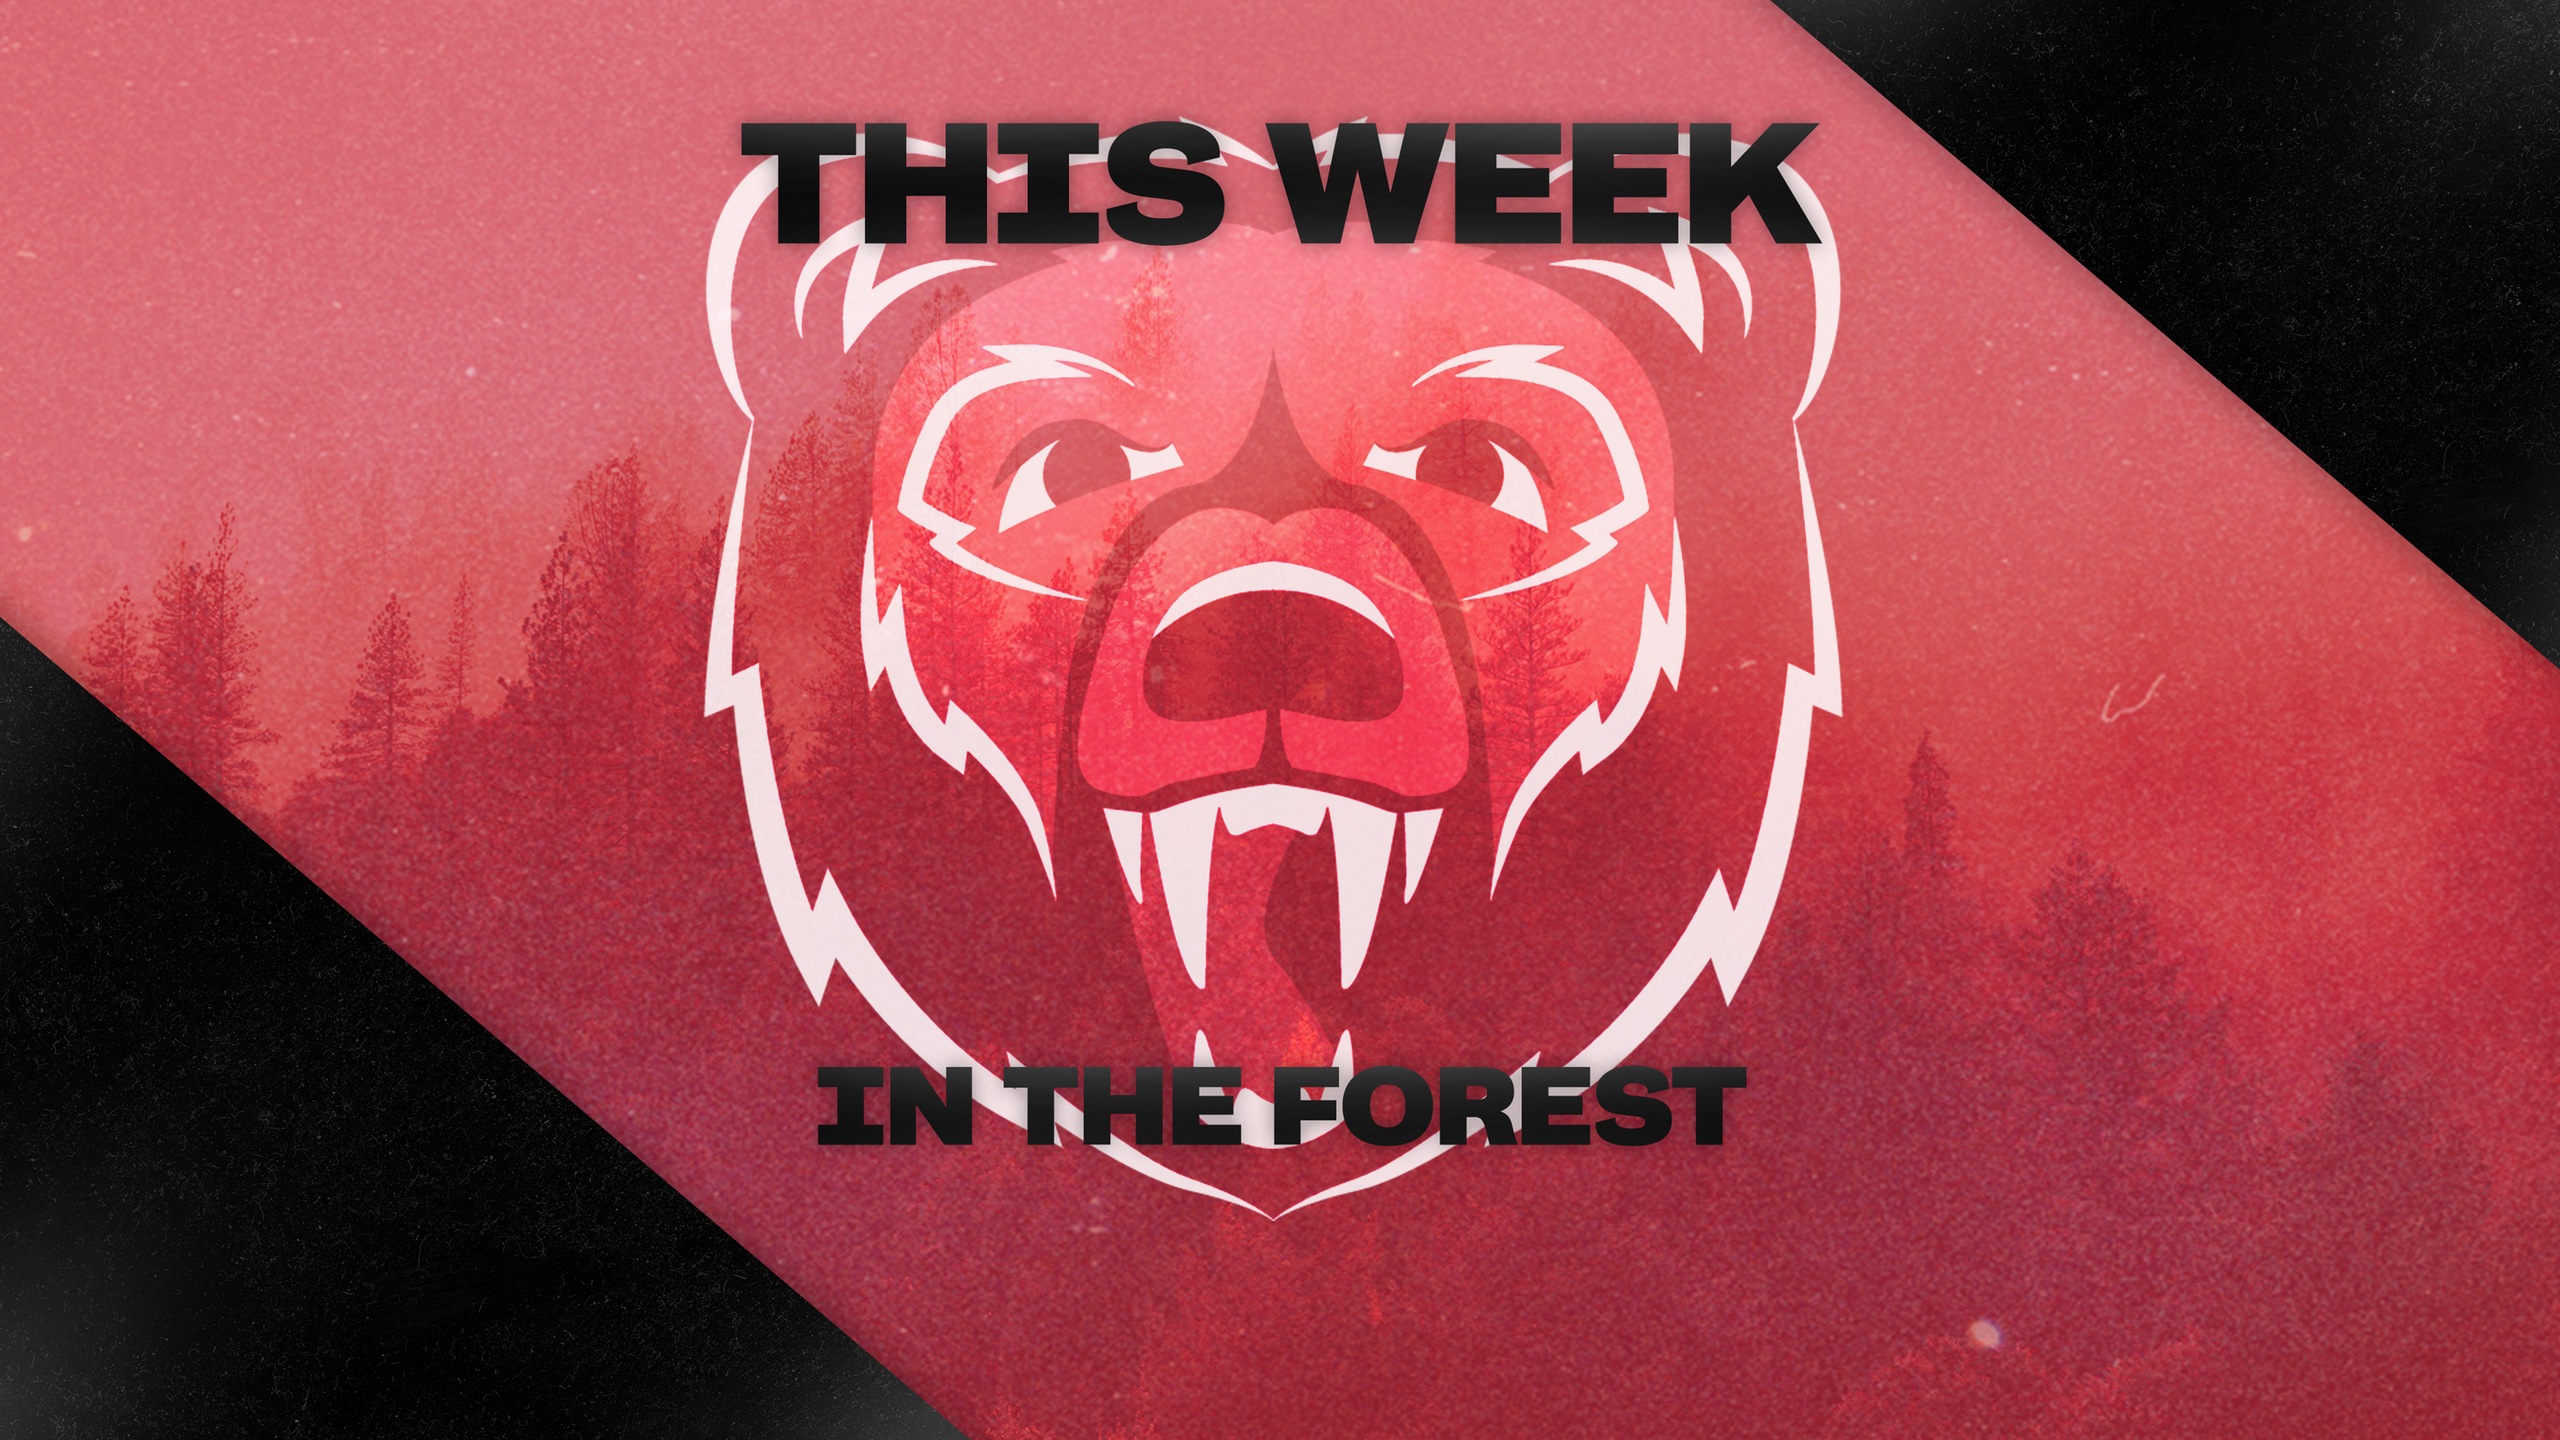 This Week in the Forest